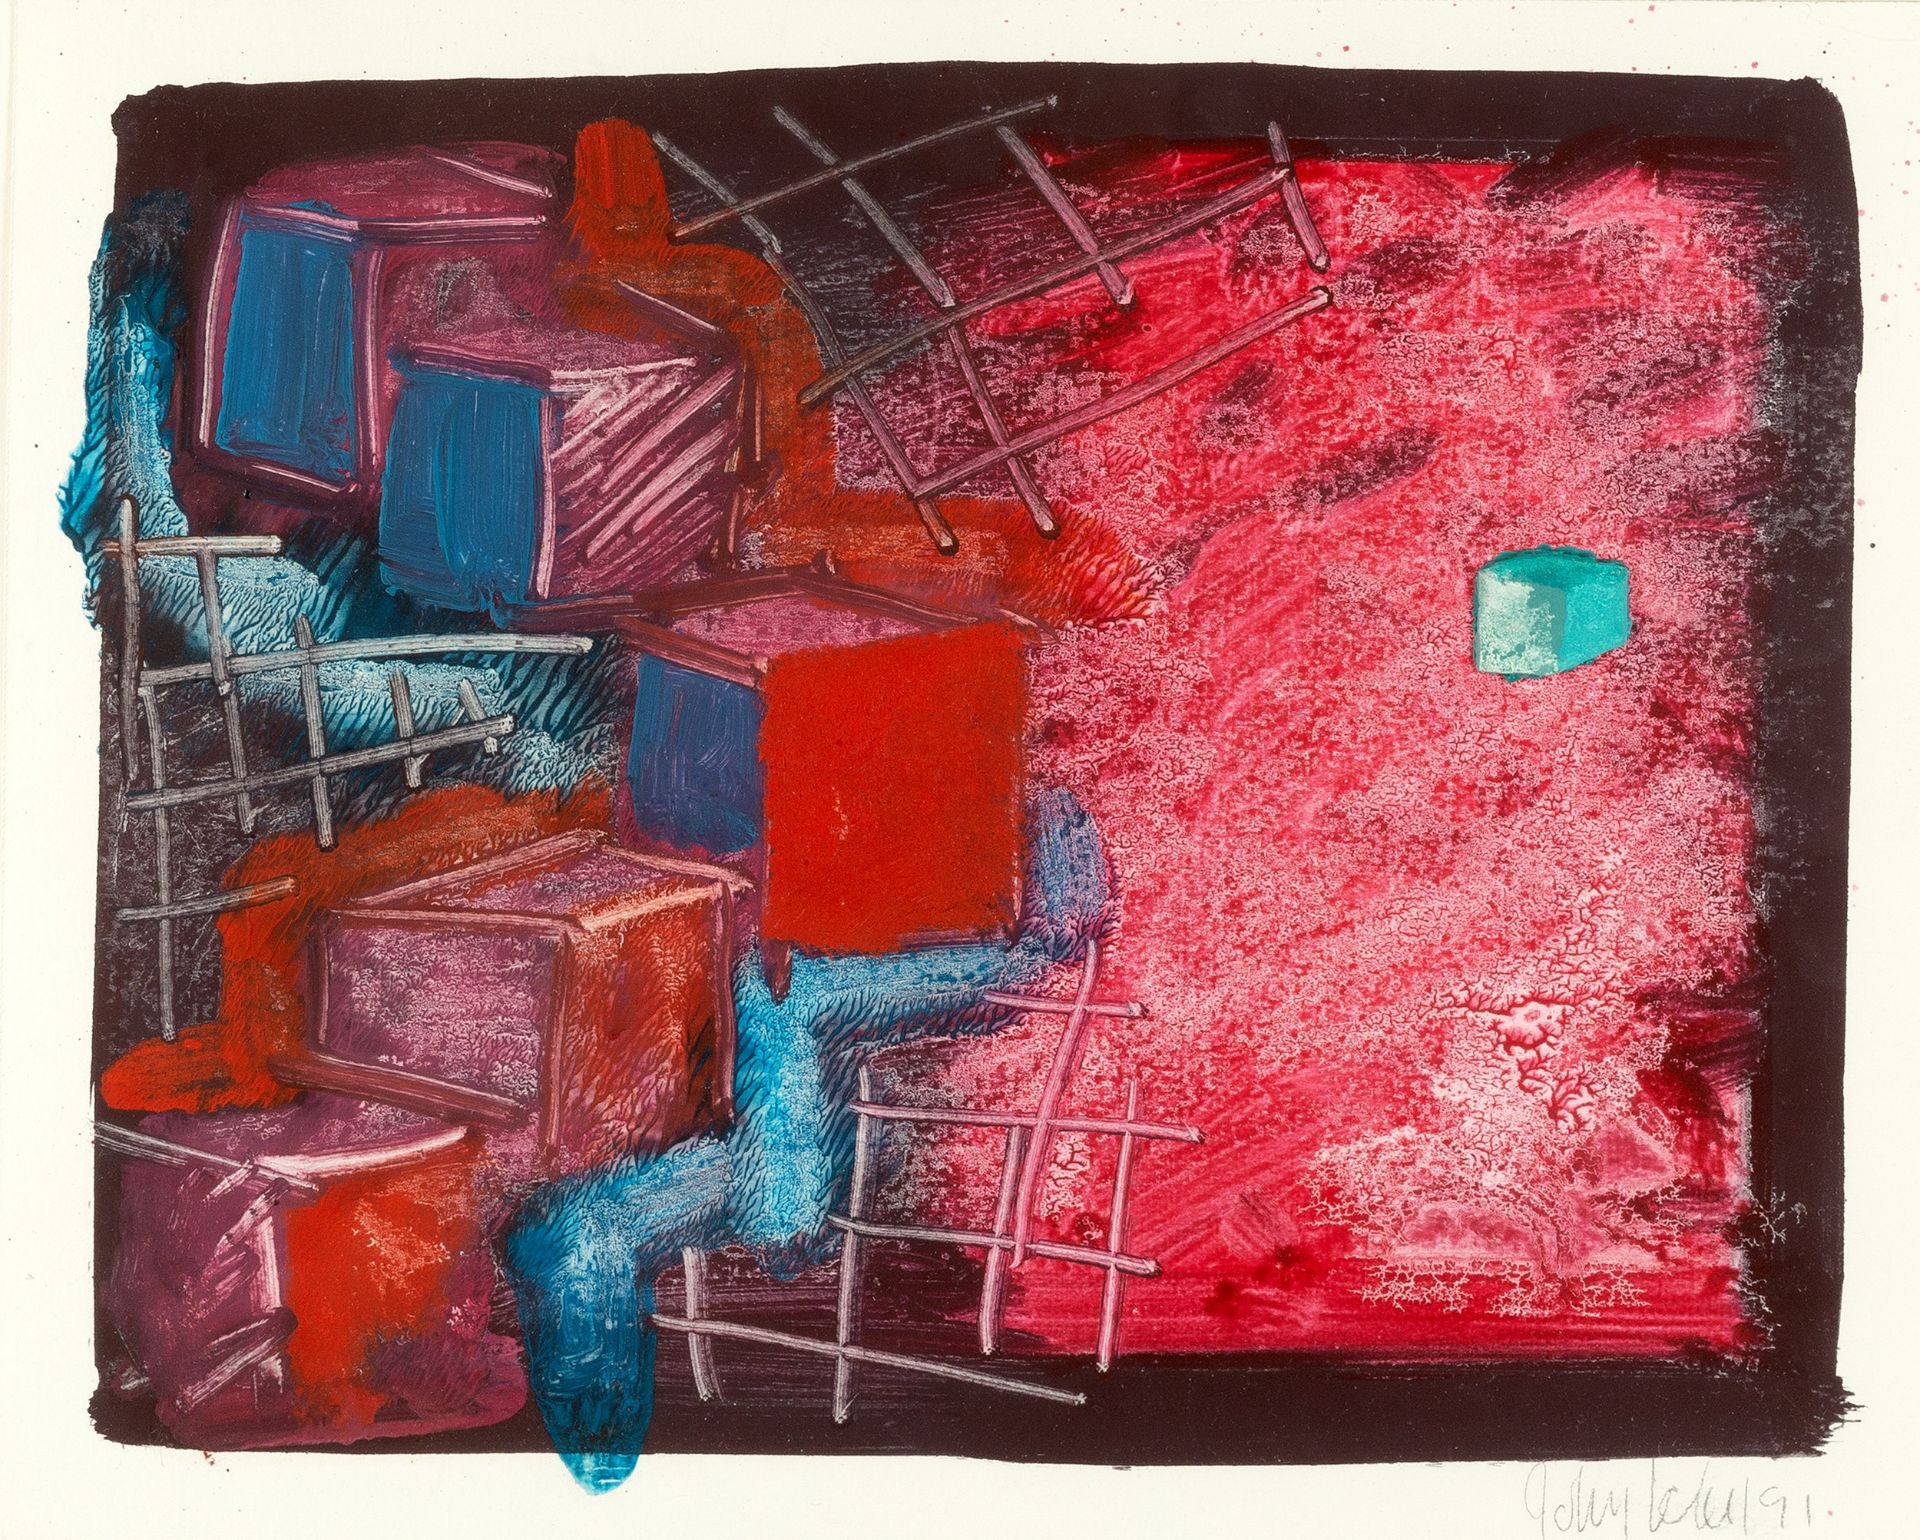 John Loker (b.1938) Bloc/Transfer, 1991 signed and dated (lower right) oil on paper 22 x 27cm.